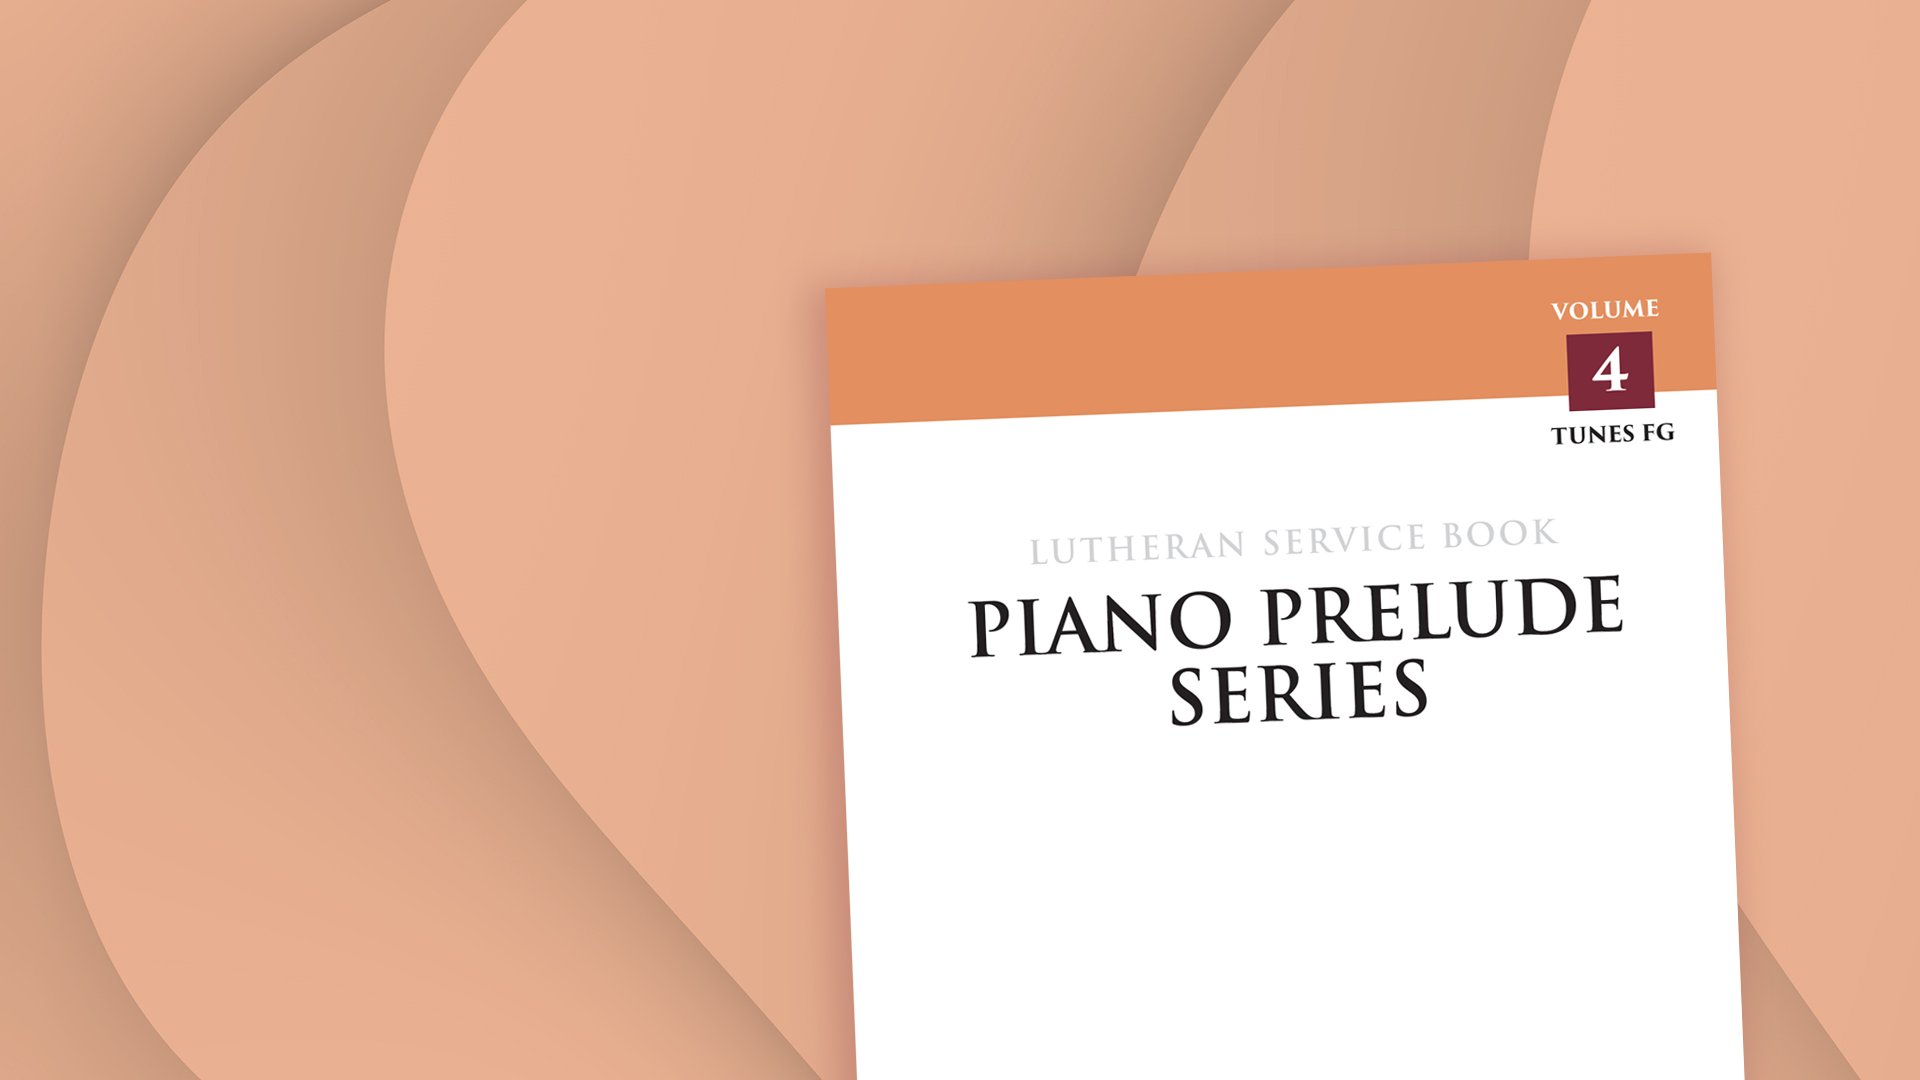 Music of the Month: Piano Prelude Series: Volume 4 (FG)